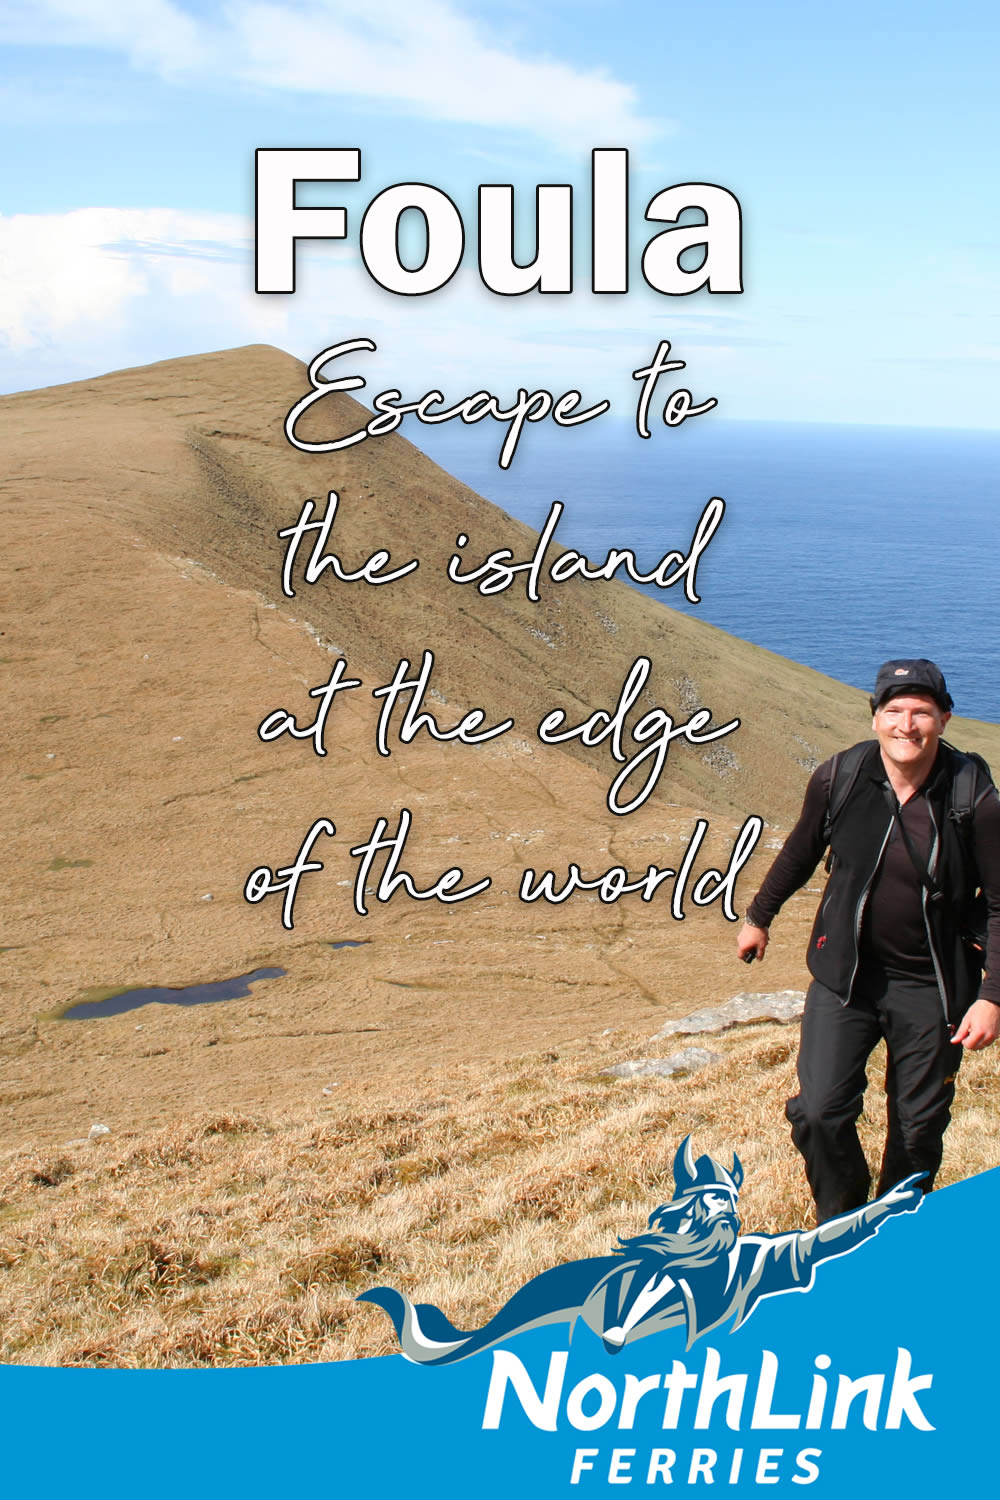 Foula – Escape to the island at the edge of the world